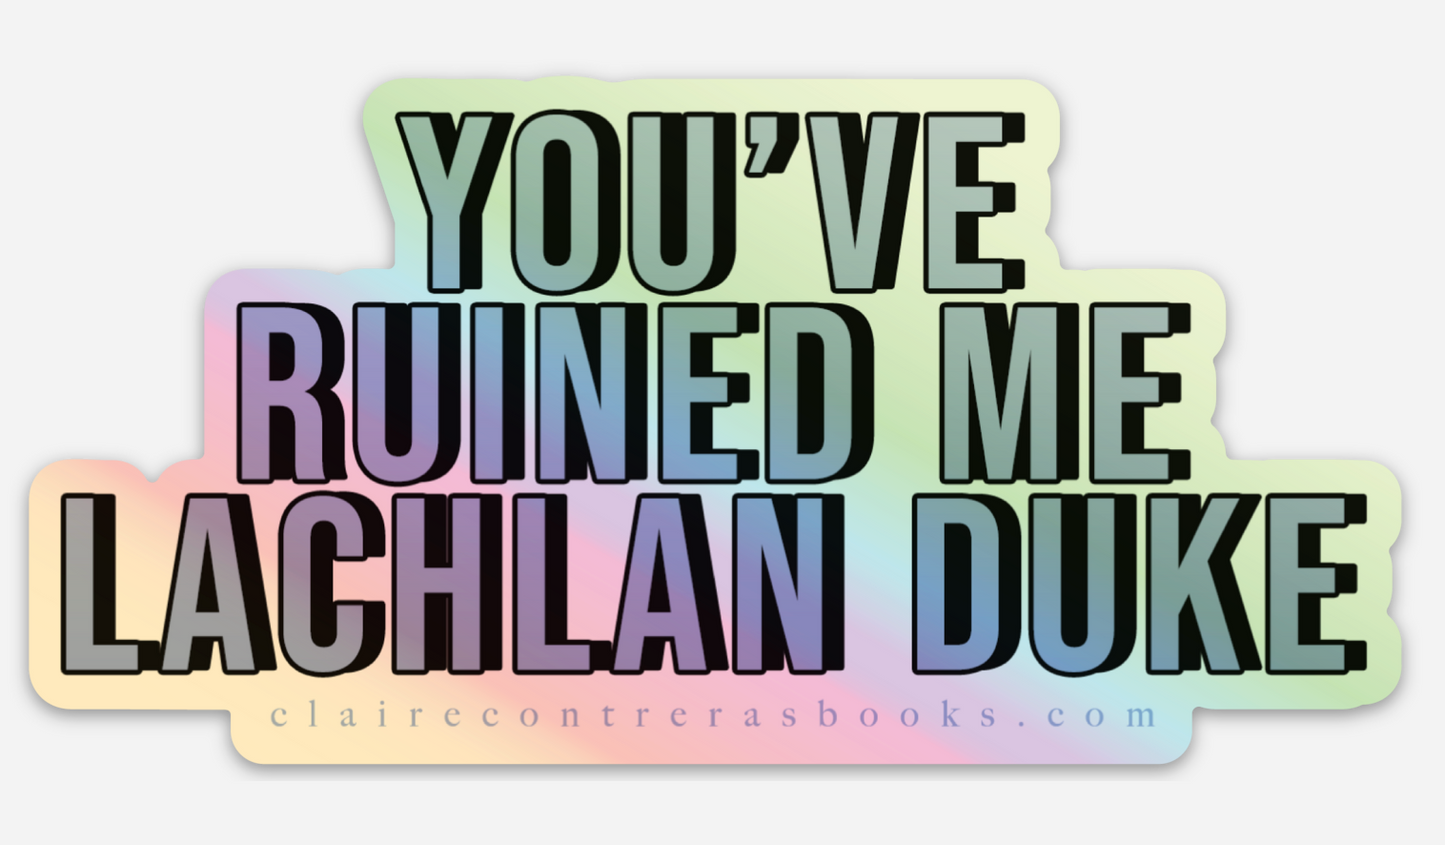 You've Ruined Me, Lachlan Duke large holographic sticker